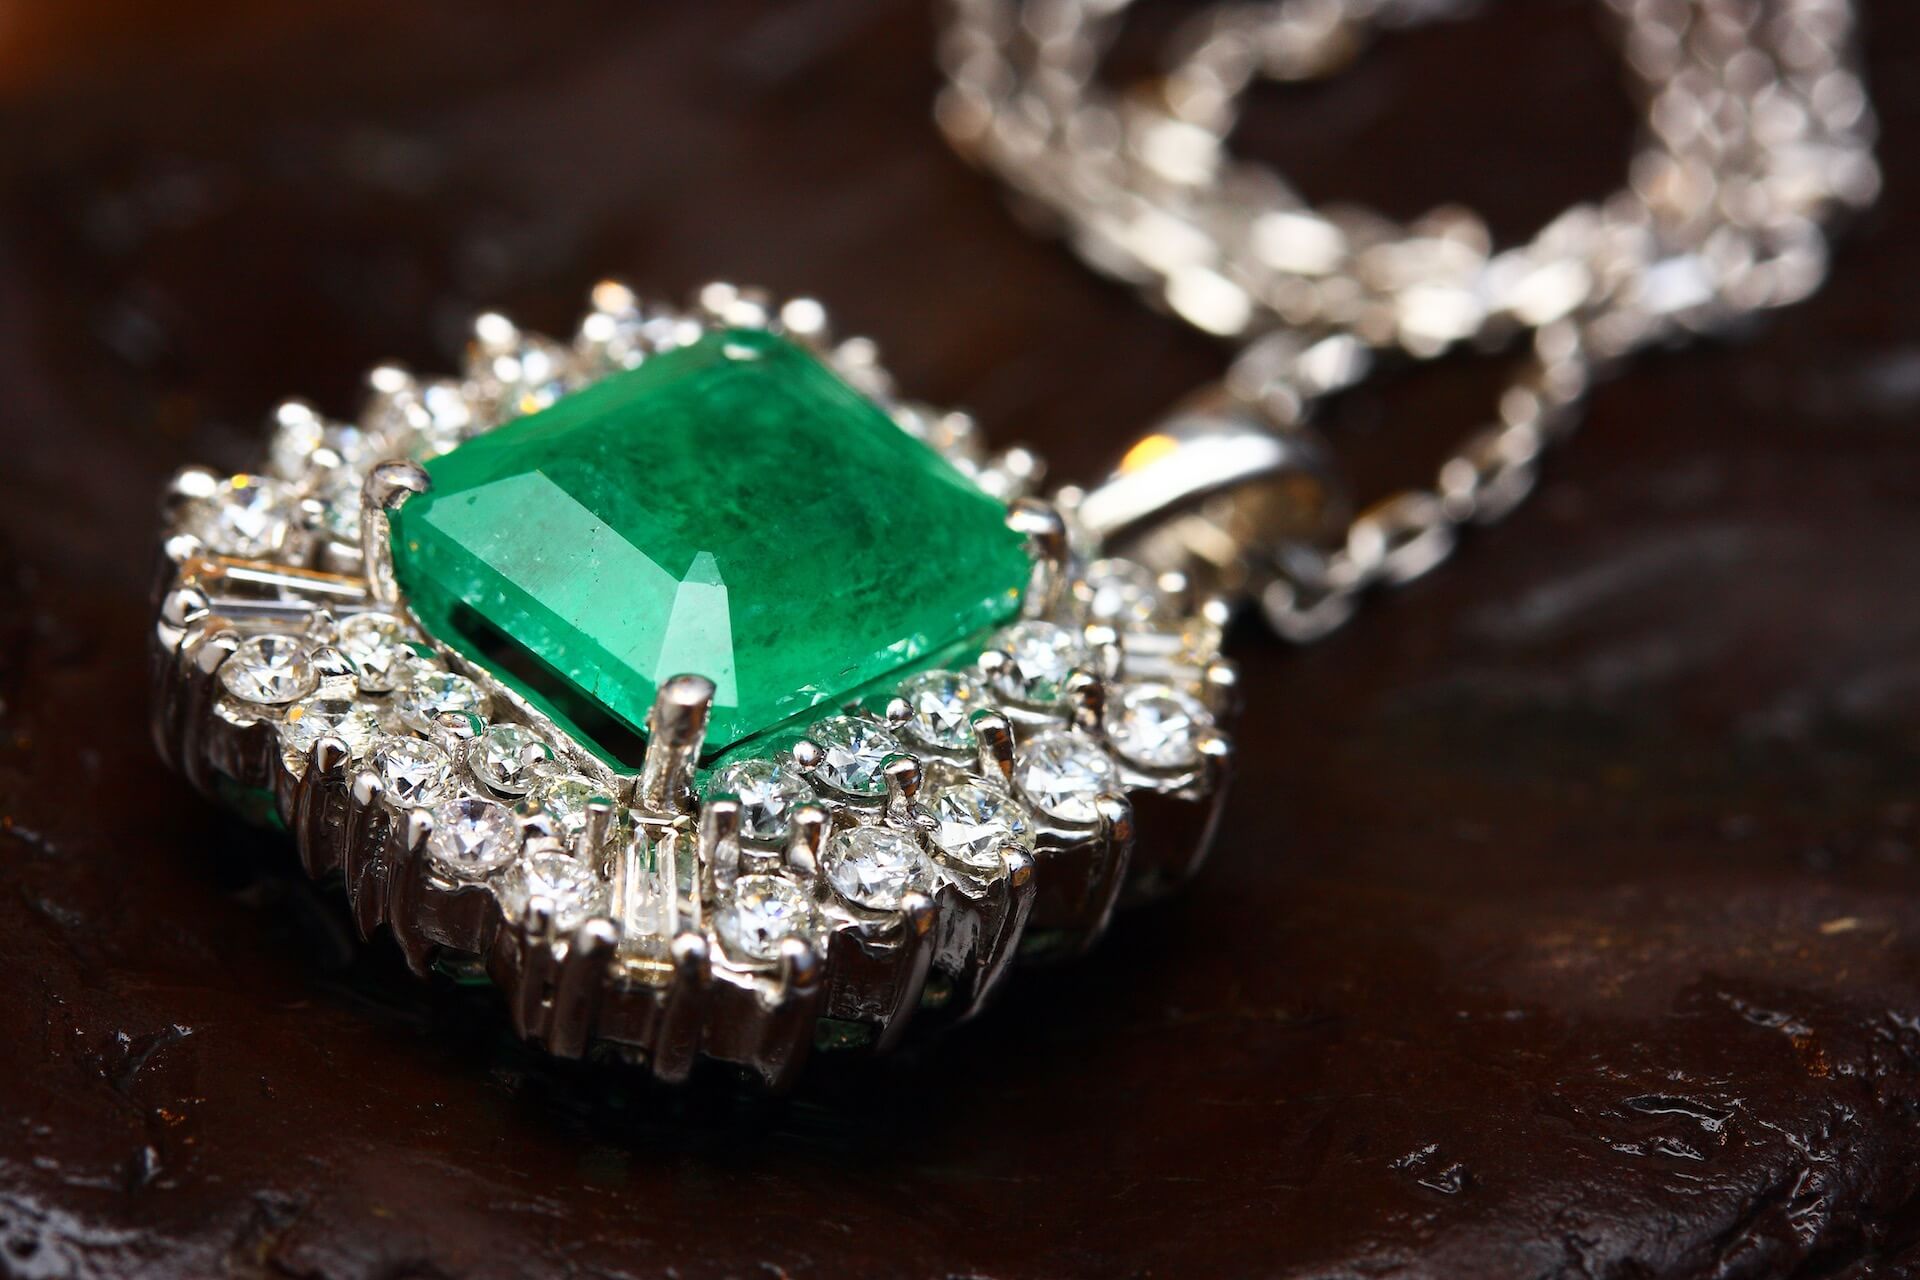 Silver-colored pendant with green gemstone